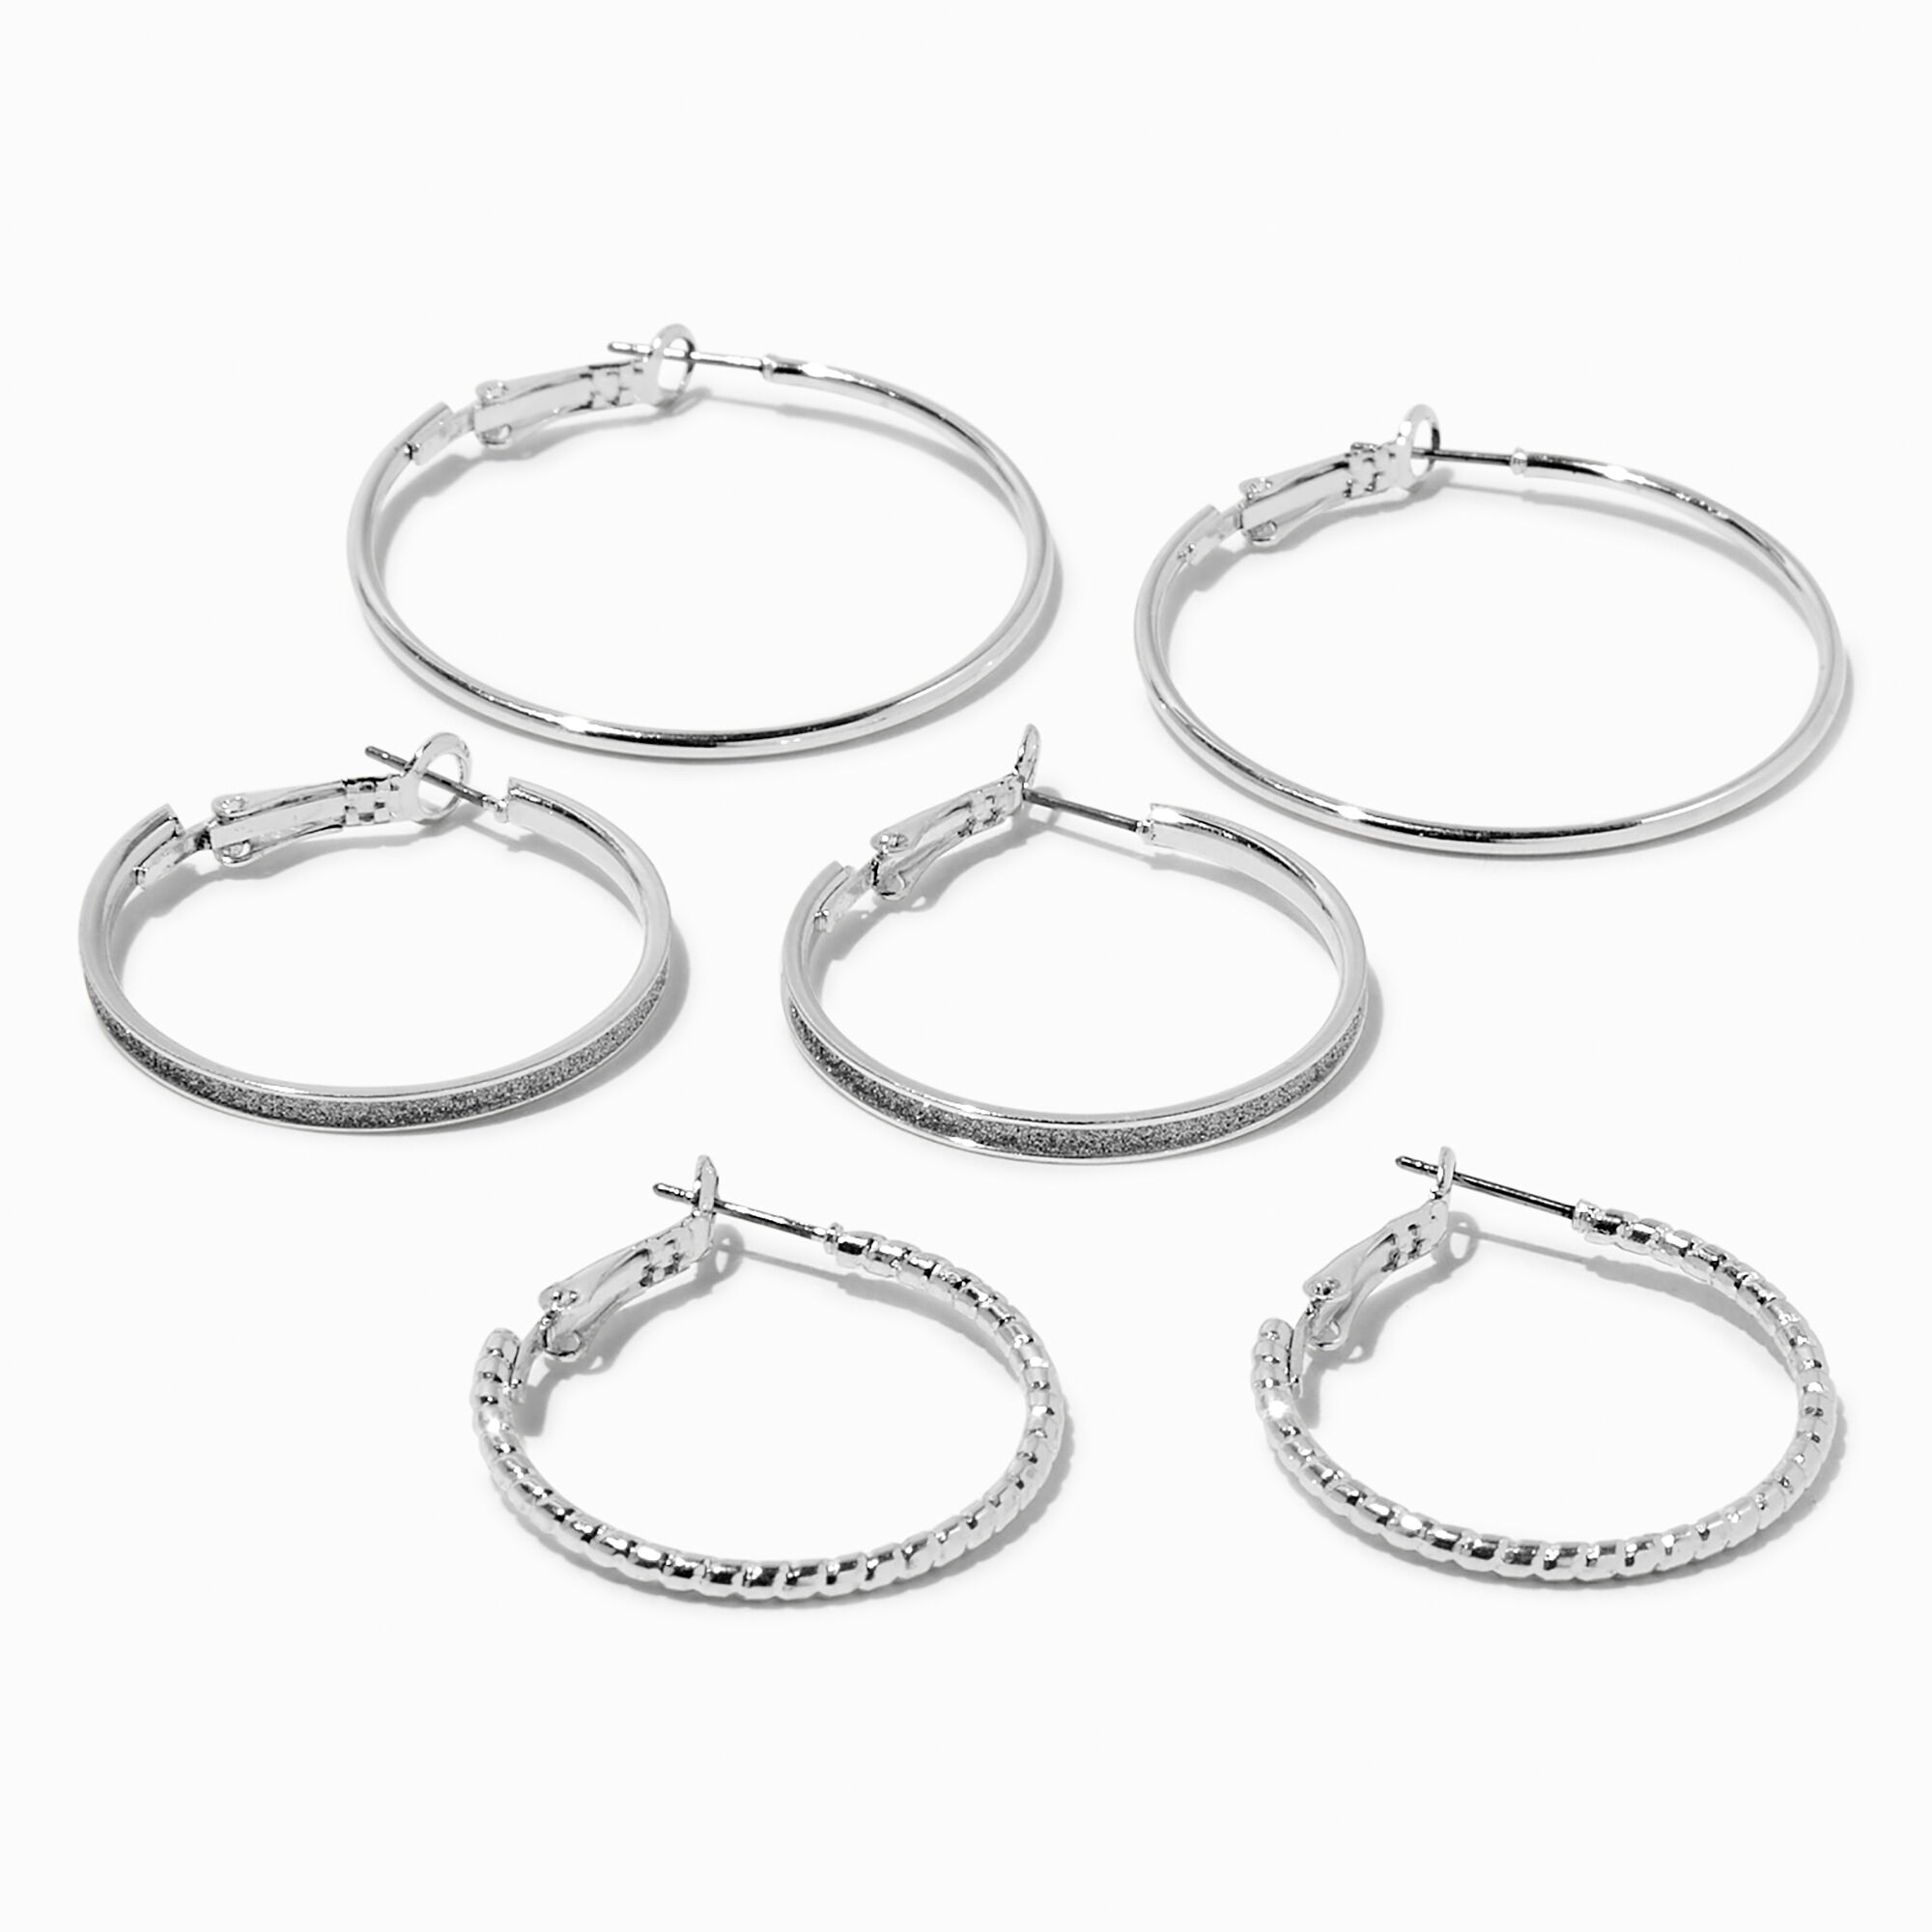 View Claires Tone Graduated Textured Hoop Earrings 3 Pack Silver information